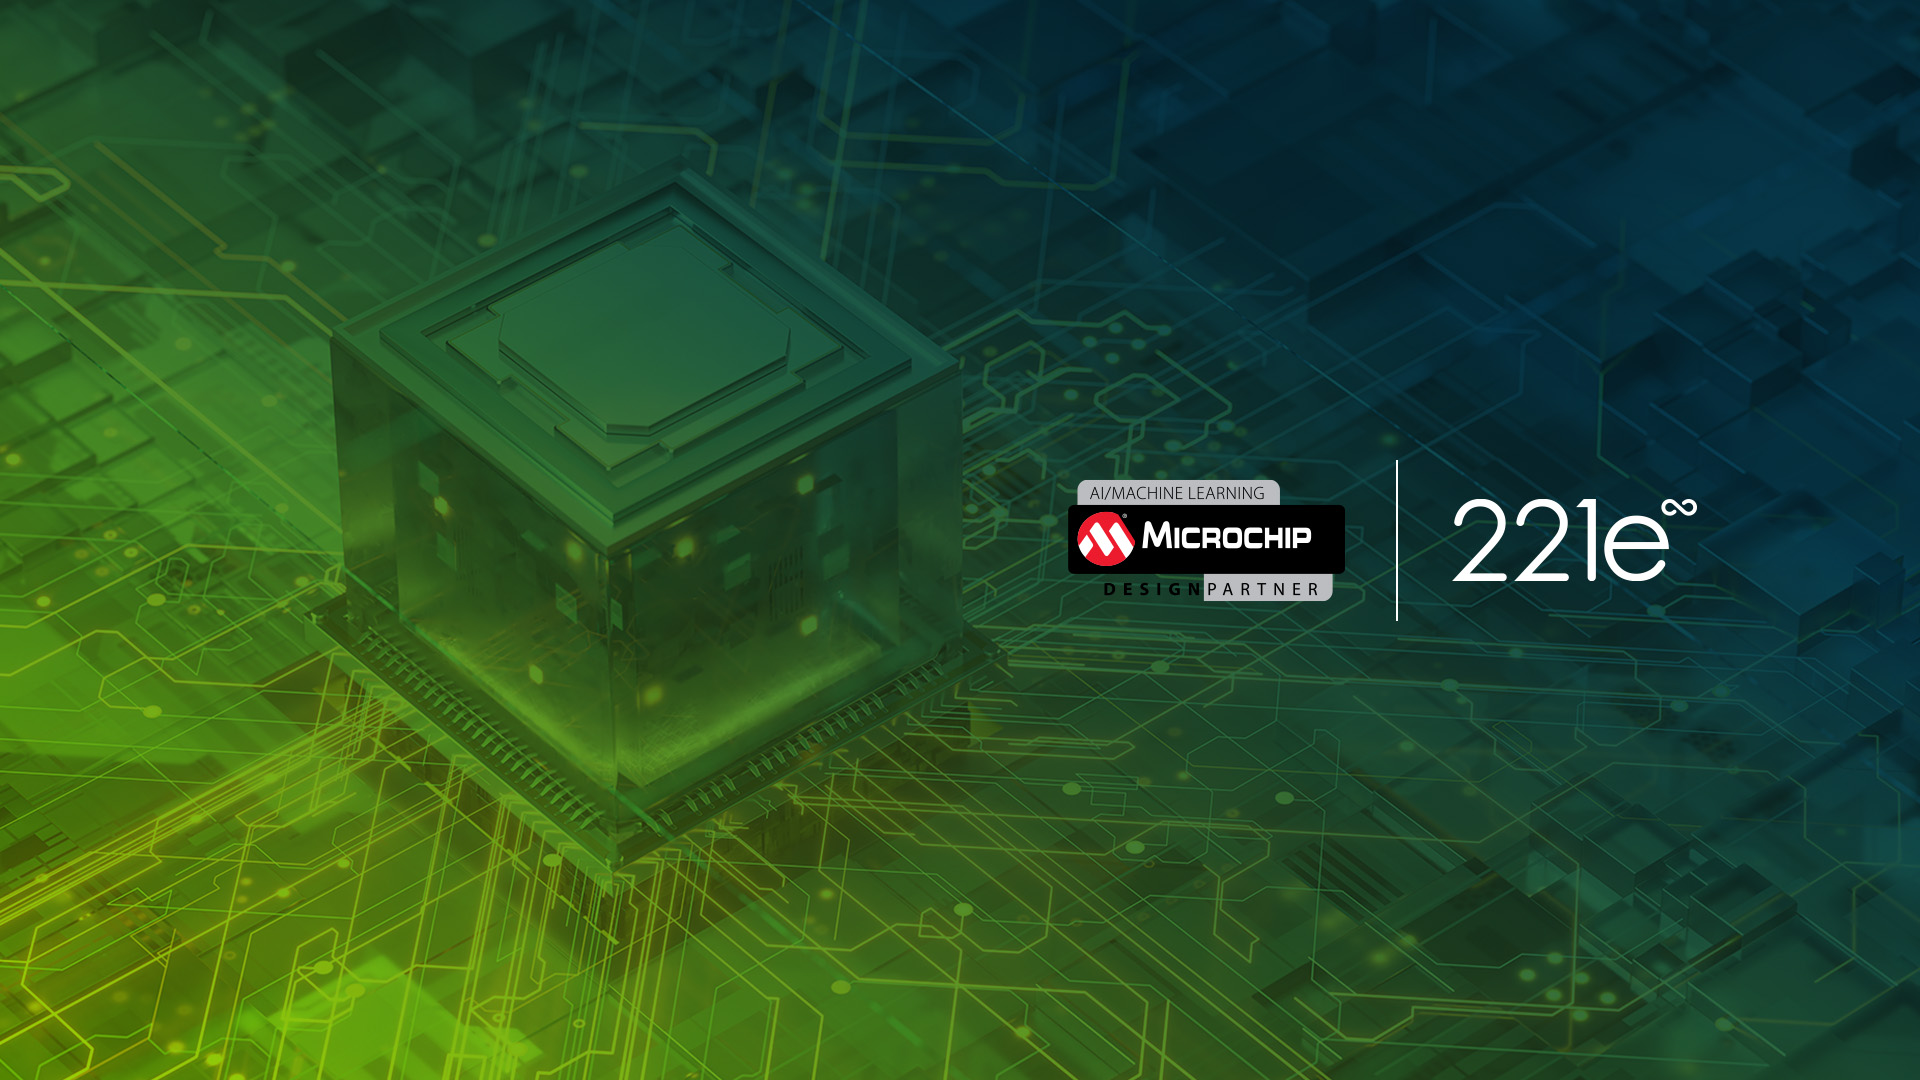 221e Partners with Microchip Technology